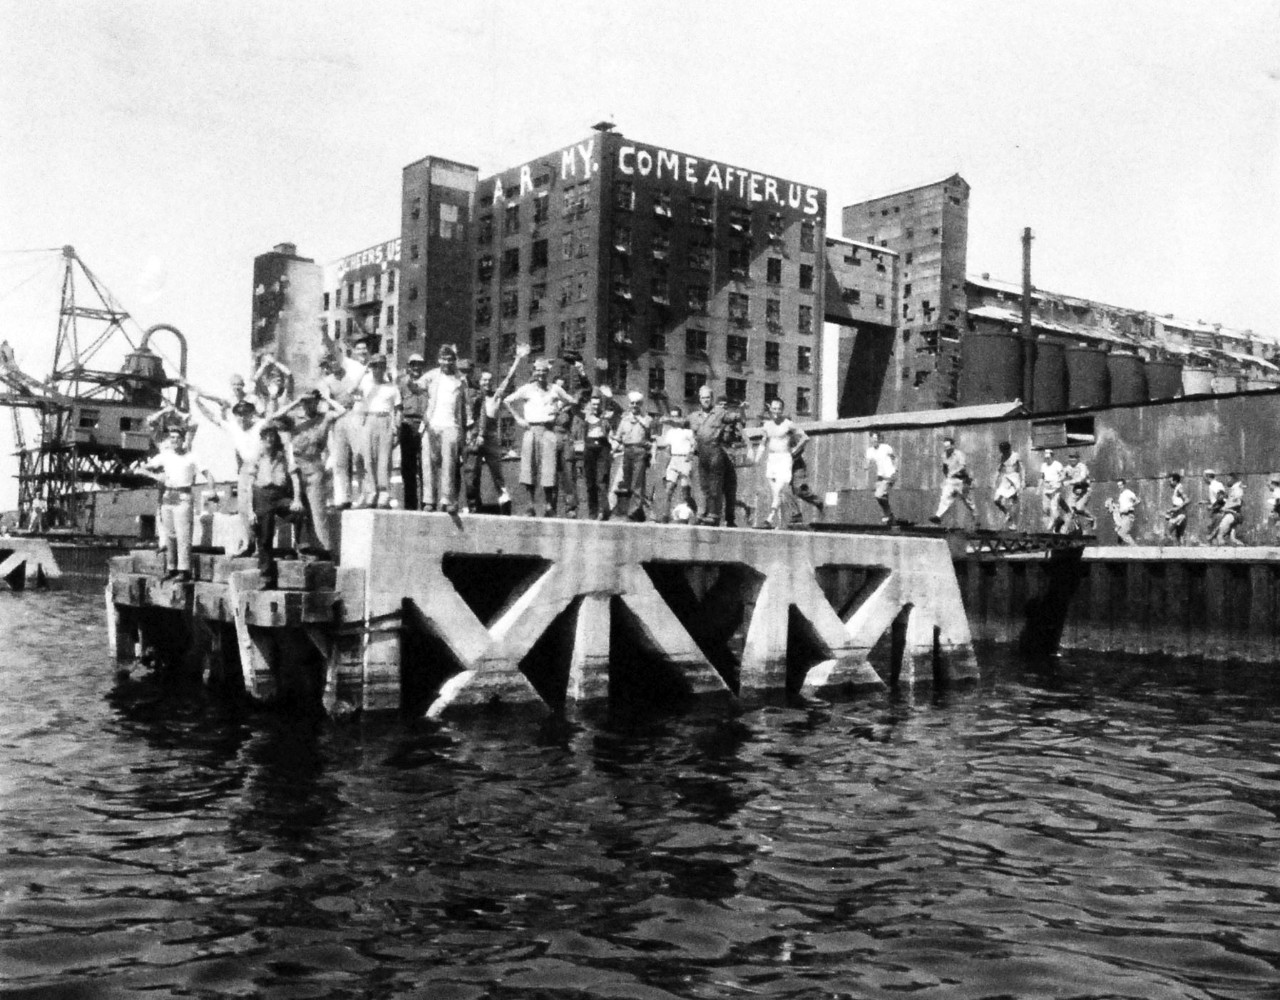 80-G-490450:    Allied Prisoners of War, Tokyo, Japan.   Prisoners of war wait on a small dock in the Tokyo waterfront area for rescue craft manned by the U.S. Navy to approach and taken them out to a waiting hospital ship, USS Benevolence (AH-13).   Tall structures in the background have been bedecked with signs calling for rescue, Sepember 1, 1945.  Official U.S. Navy photograph, now in the collections of the National Archives.   (2014/5/29). 